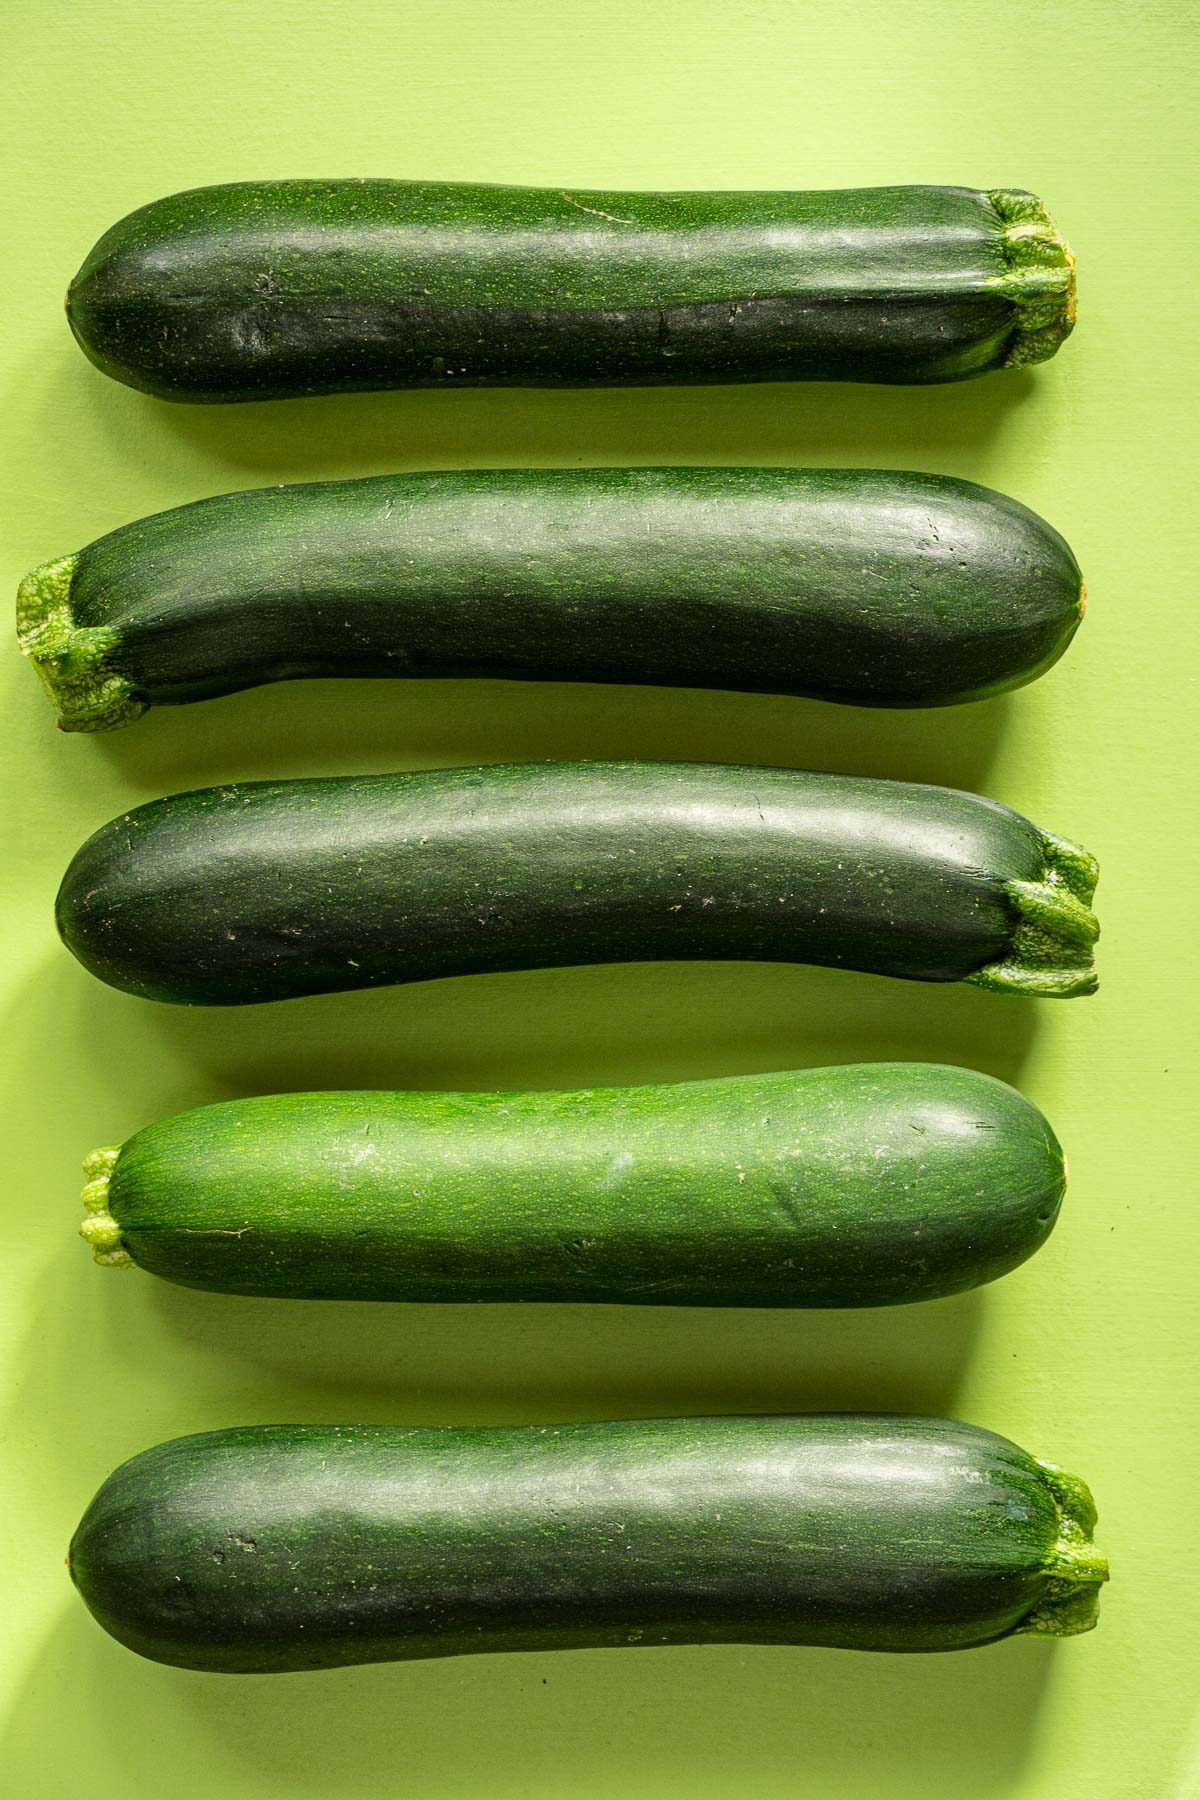 Five zucchini on a green surface